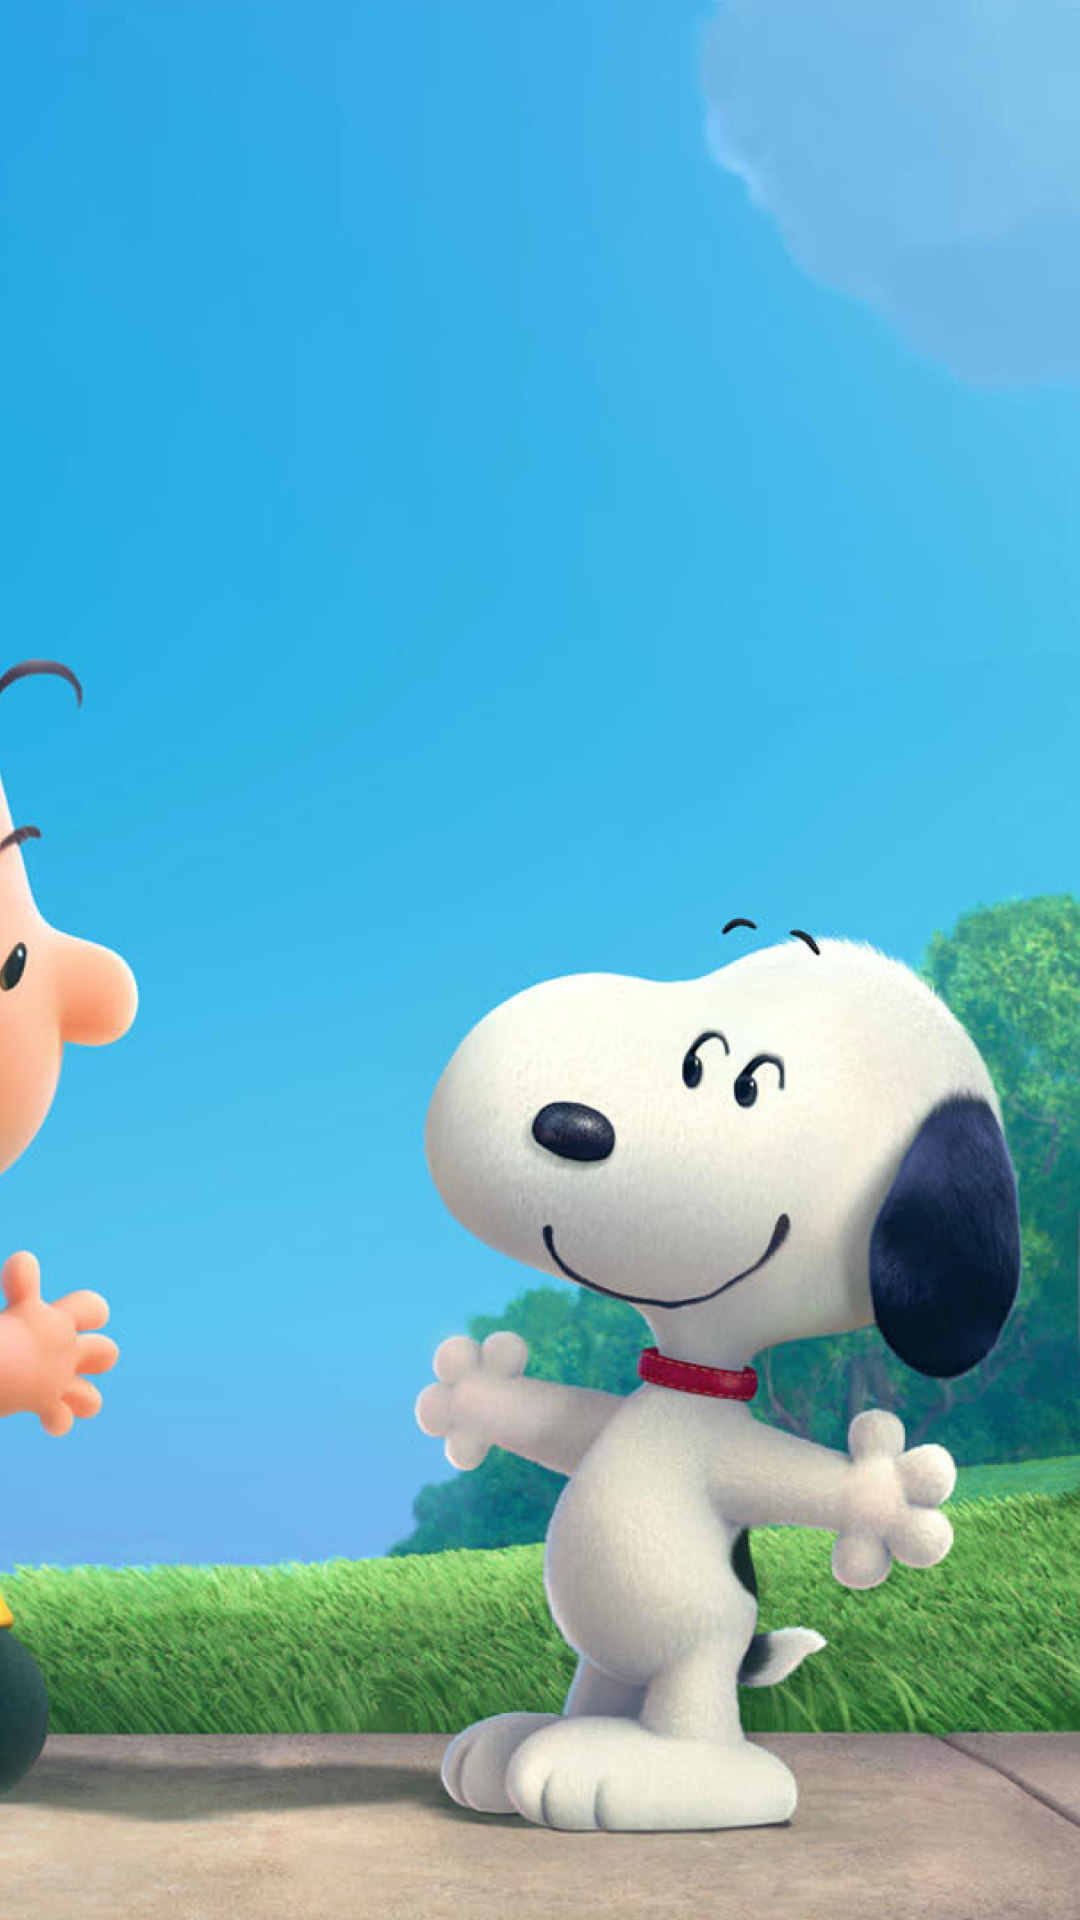 The Peanuts Movie with Snoopy and Charlie Brown Wallpaper for Nokia Lumia  1520